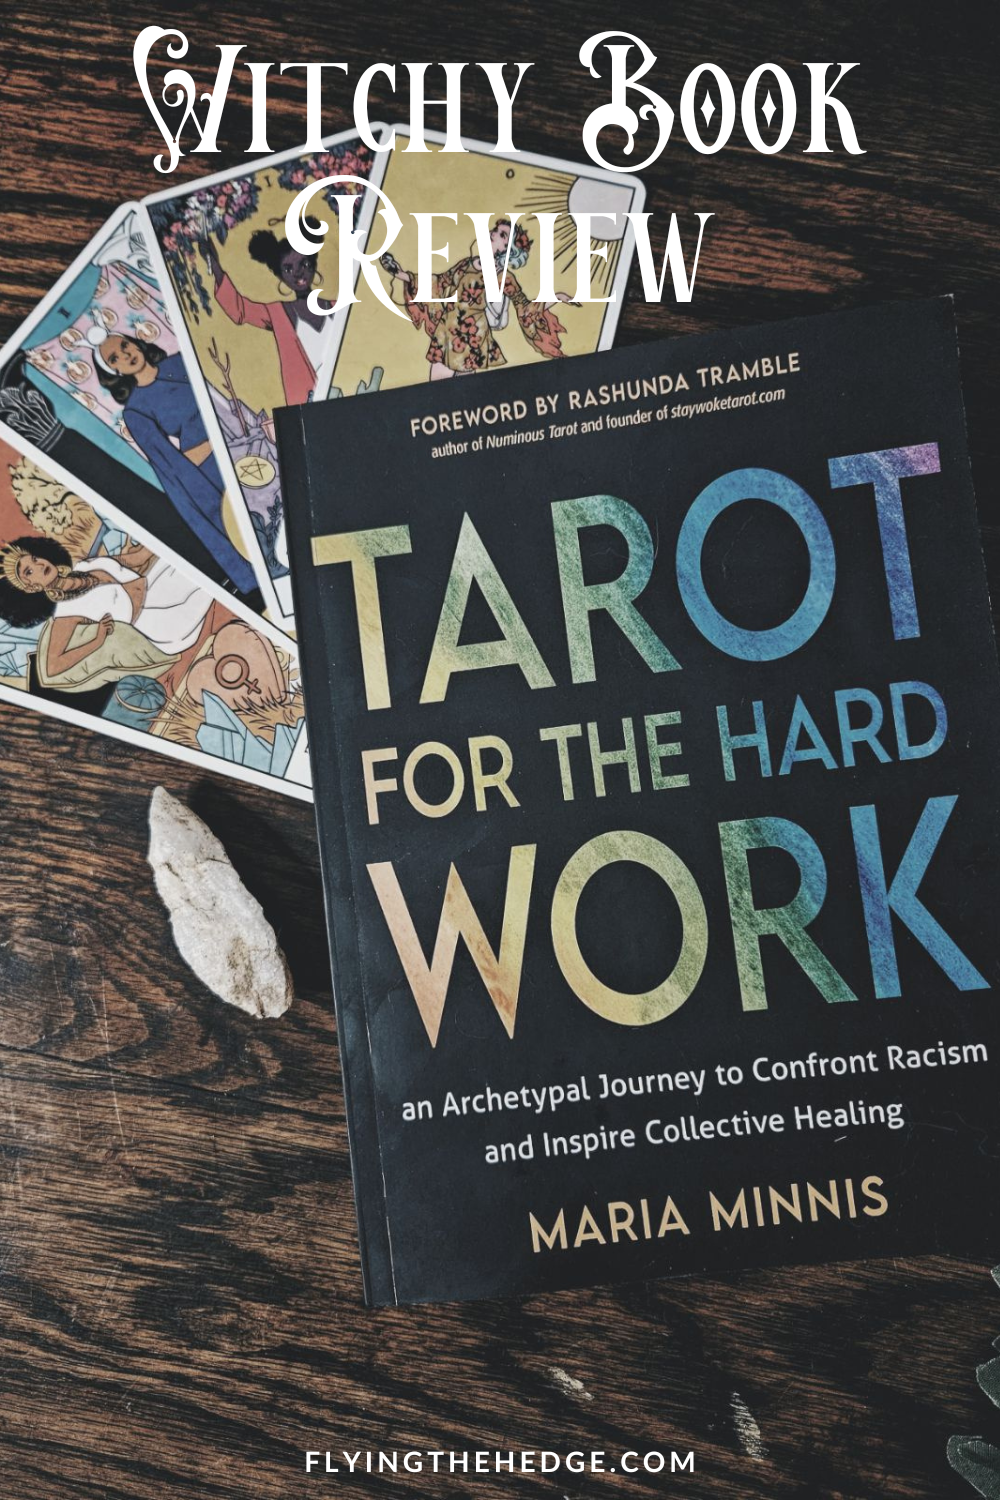 tarot, decolonization, collective liberation, desettling, anti-racism, book review, witch, witchcraft, occult, spiritual, wicca, wiccan, pagan